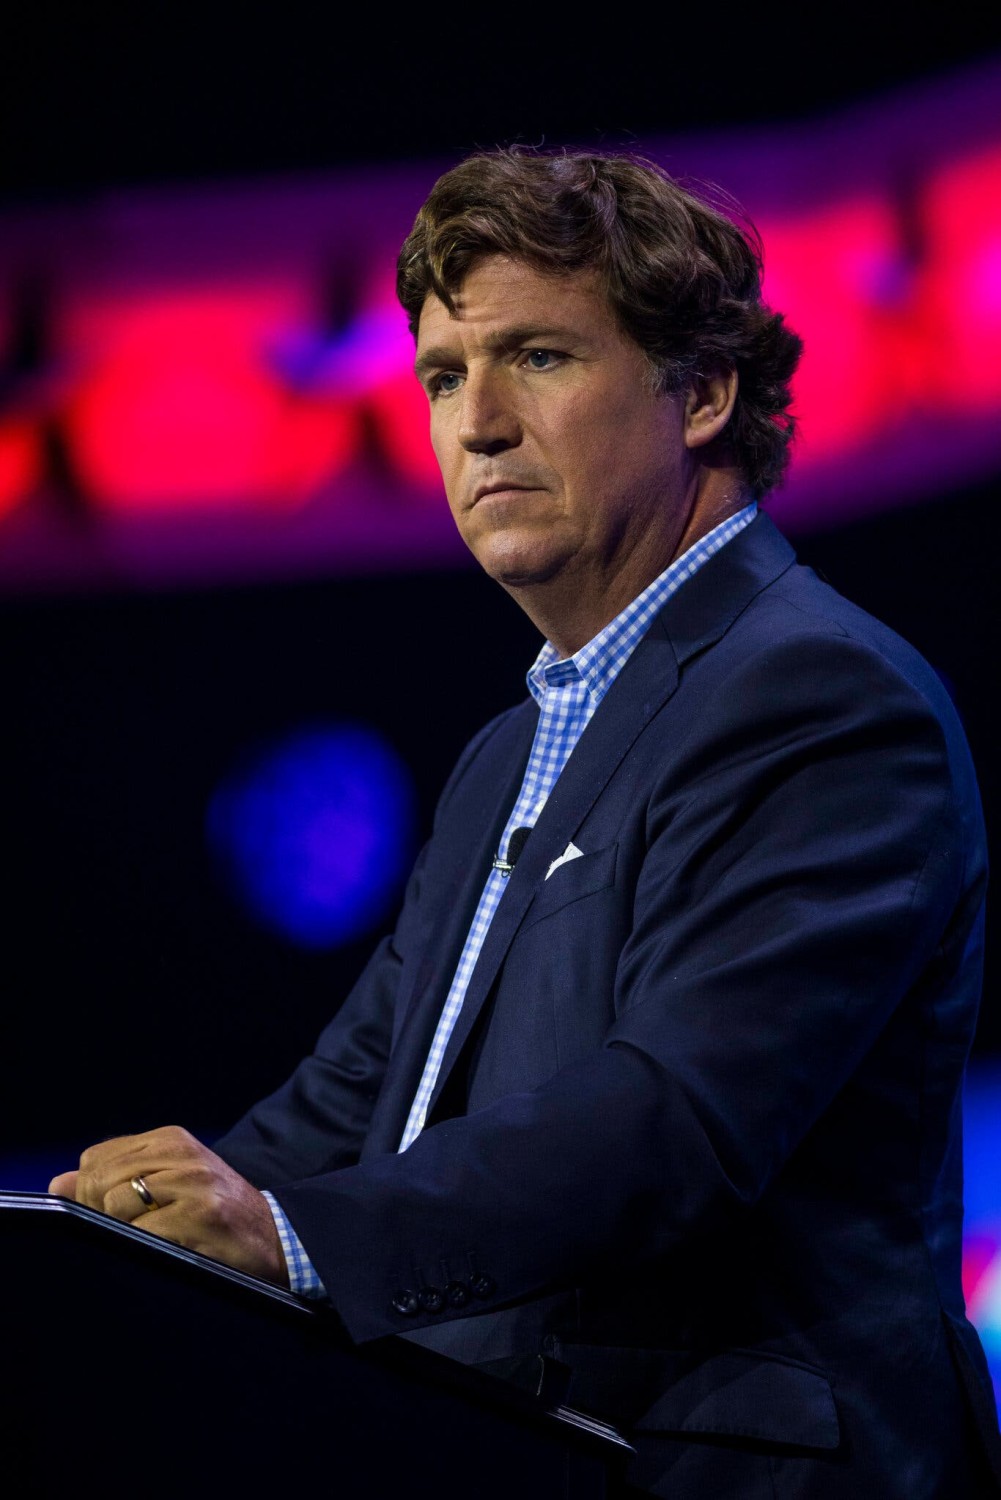 Tucker Carlson’s commentaries have often been featured on Russian state television.Credit...Saul Martinez for The New York Times